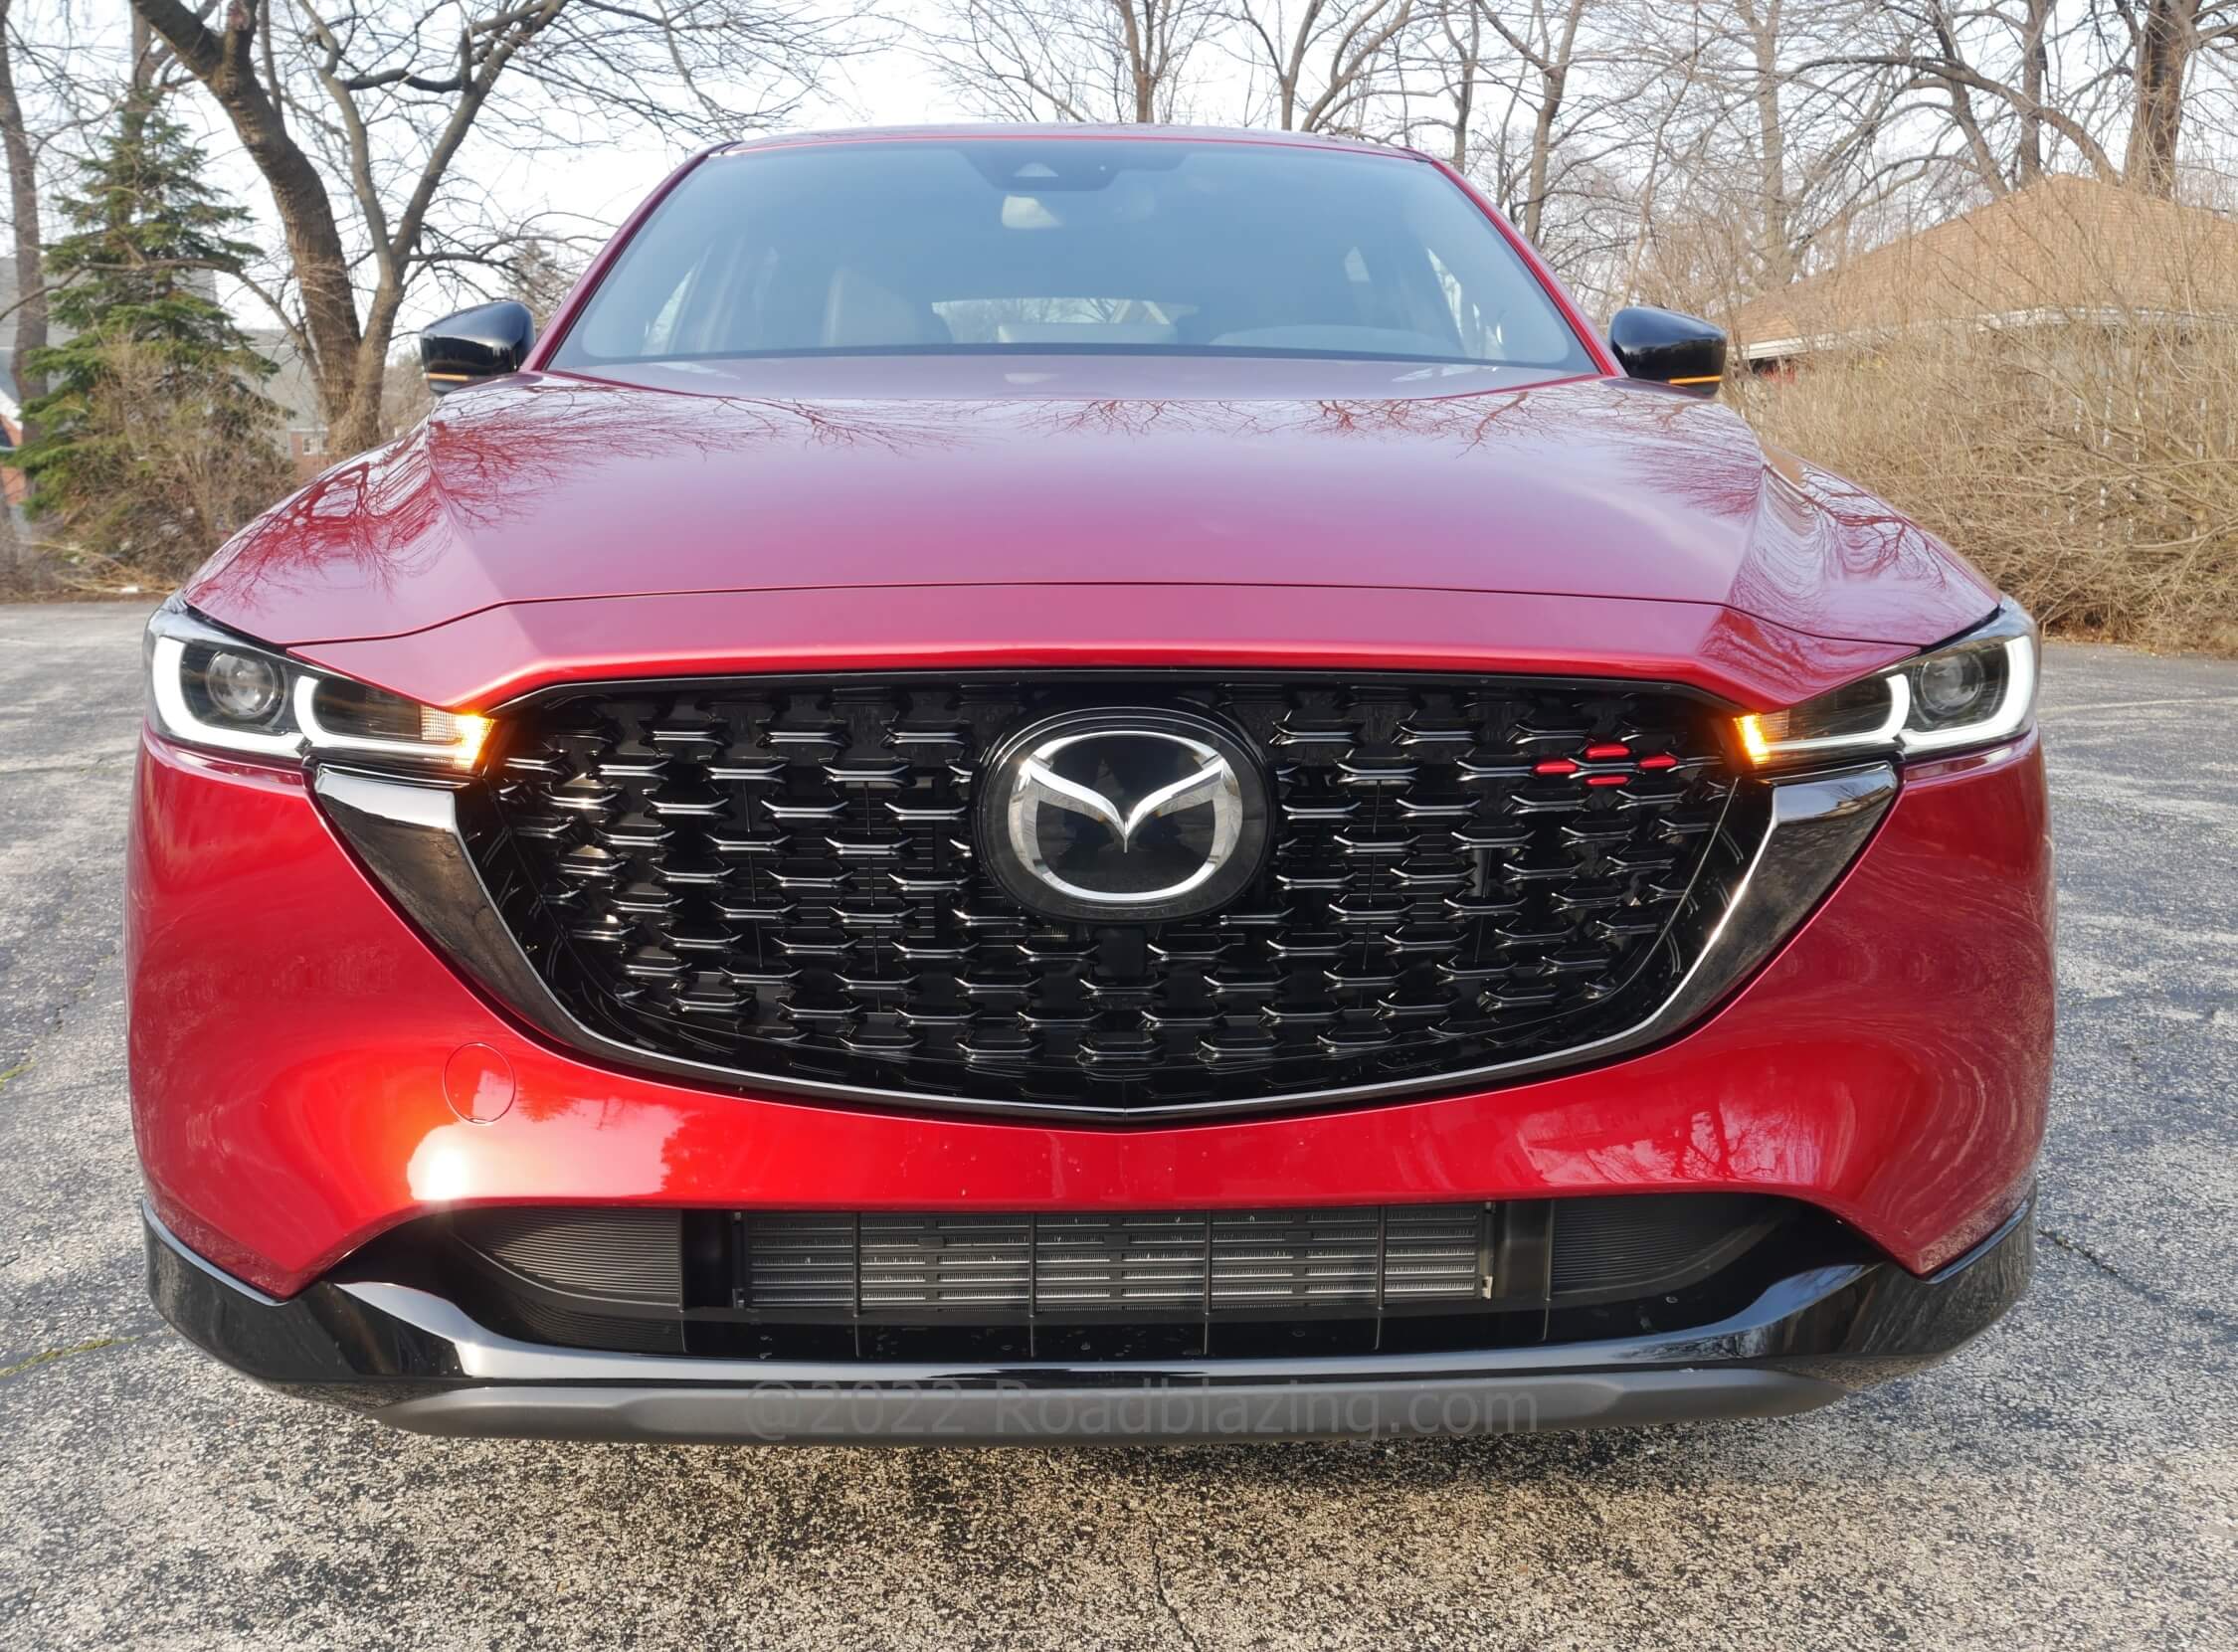 2022 Mazda CX-5 2.5T Turbo AWD: new deep link grille, w/ Turbo exclusive 4 red link segments and gloss black finish, wider lower cradle